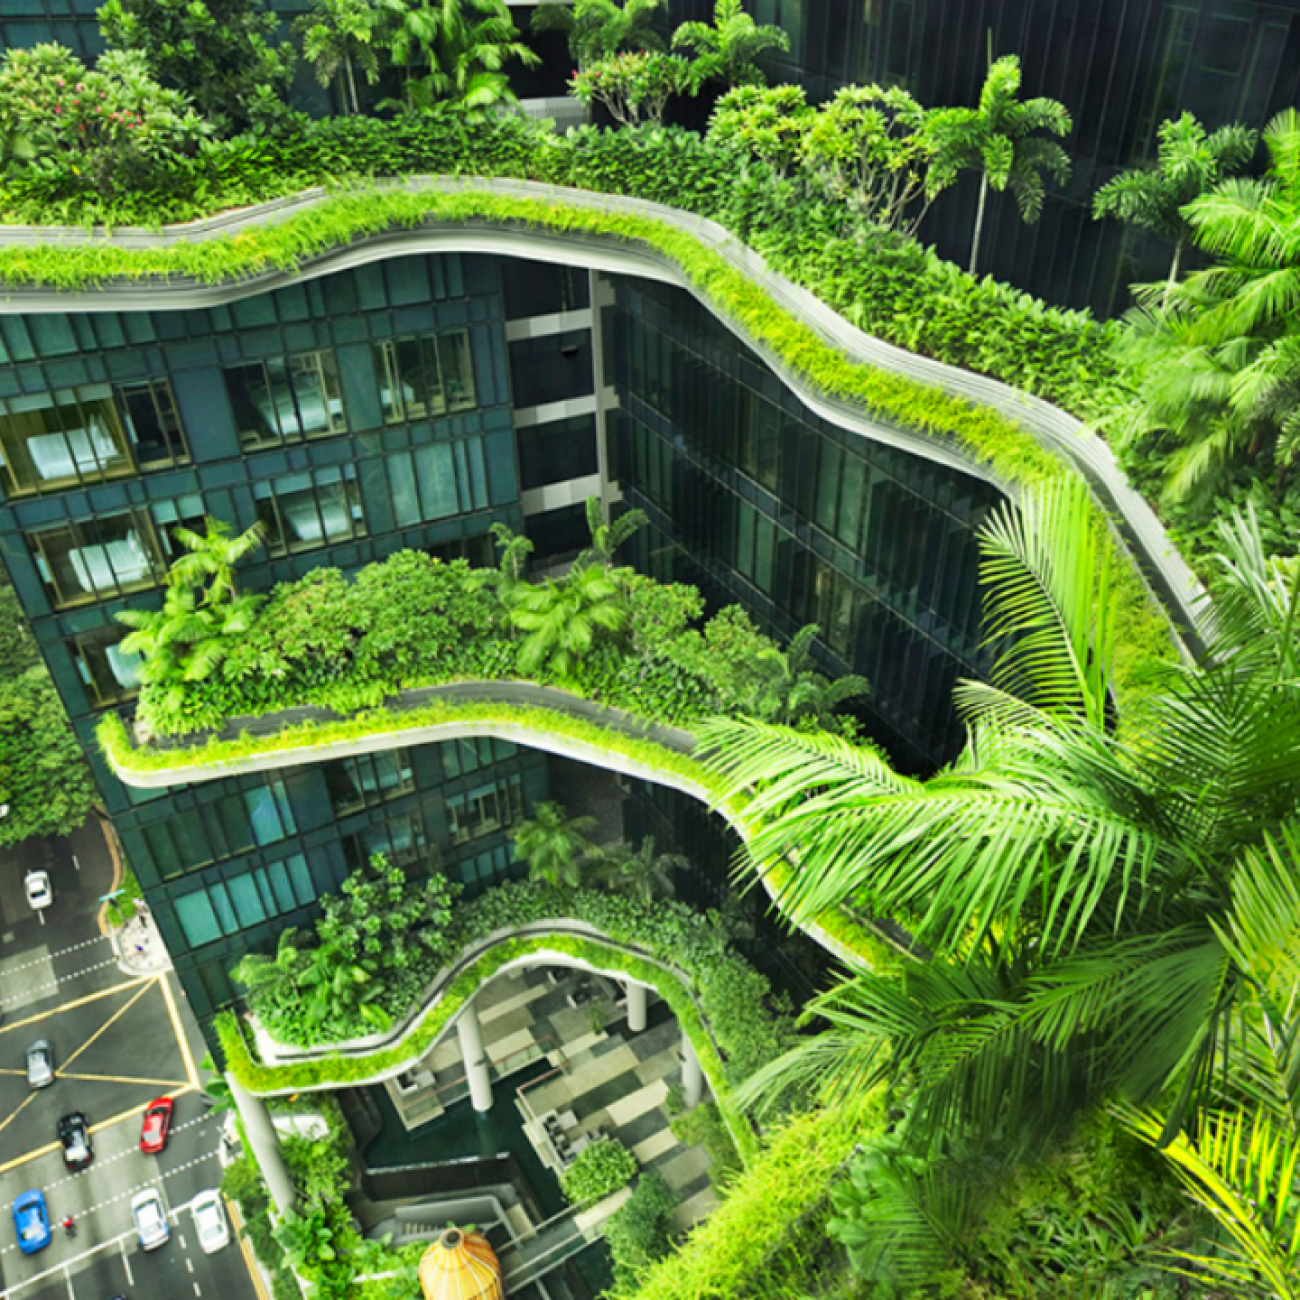 The Parkroyal Collection Pickering, in Singapore, is a "green" hotel, designed with naturally ventilated corridors, solar-powered irrigation, rain water retention and sun shading.